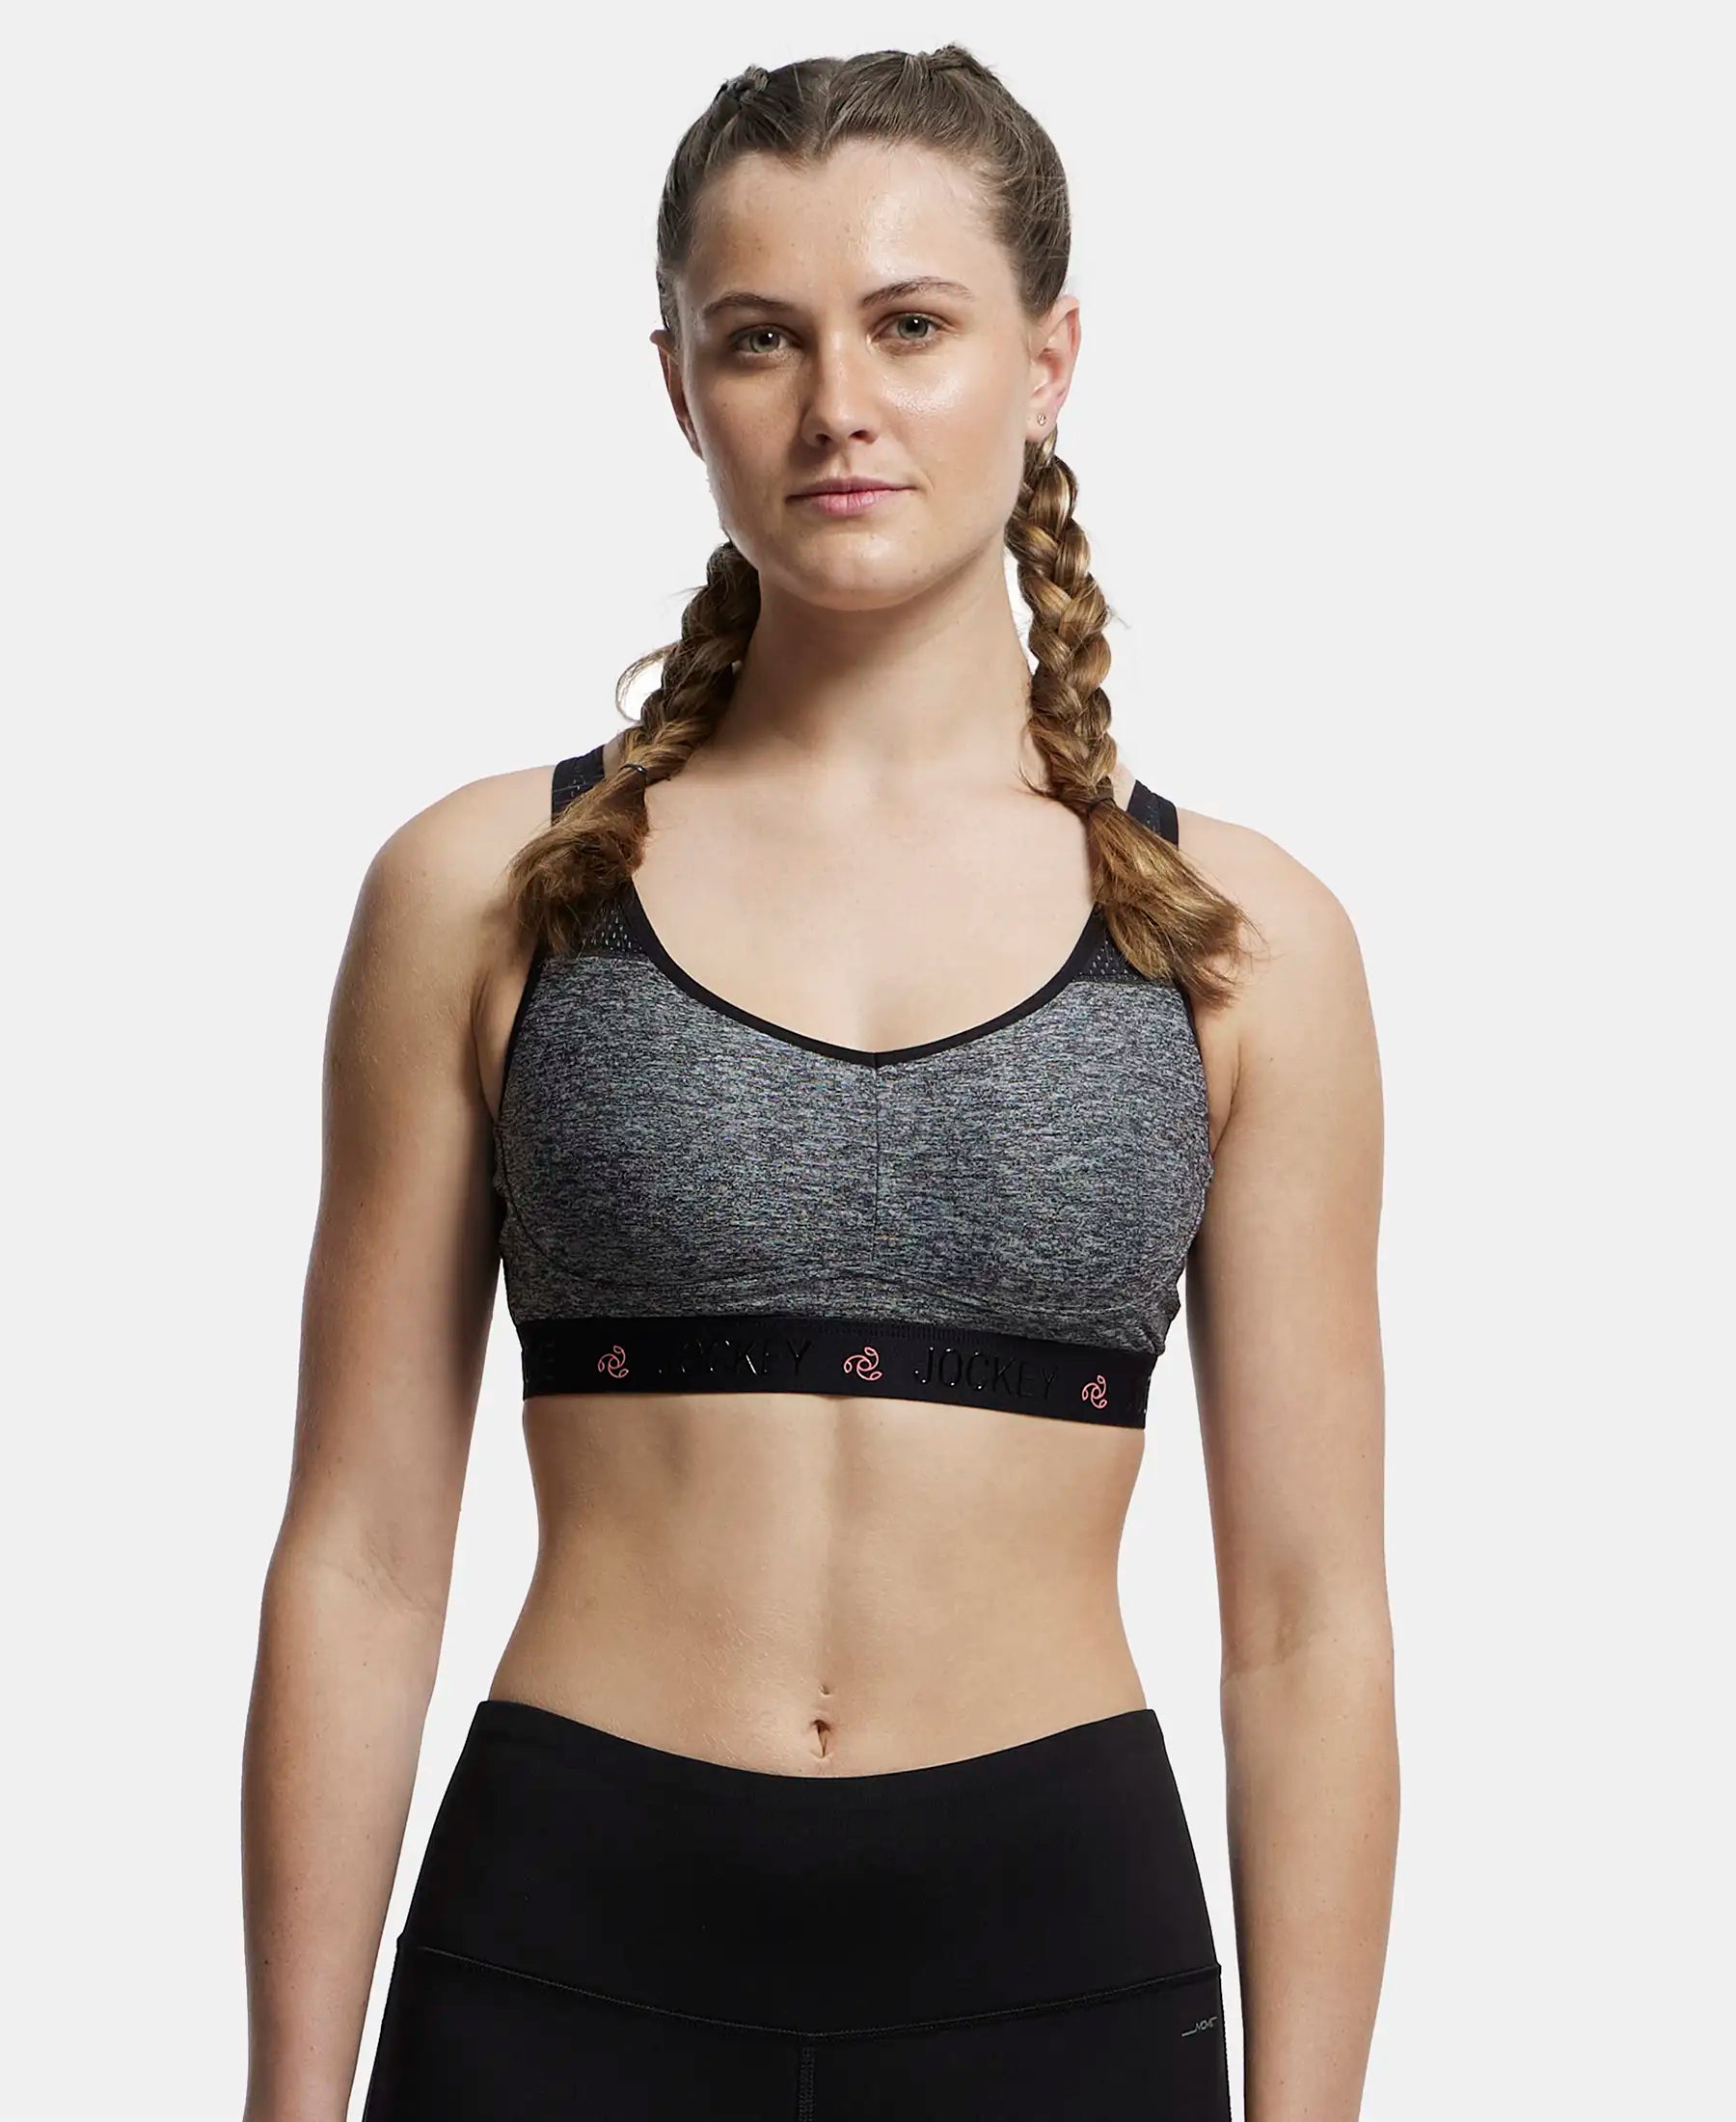 Jockey Girl's Cross Back Crop Top with Durable Under band Sports Bra